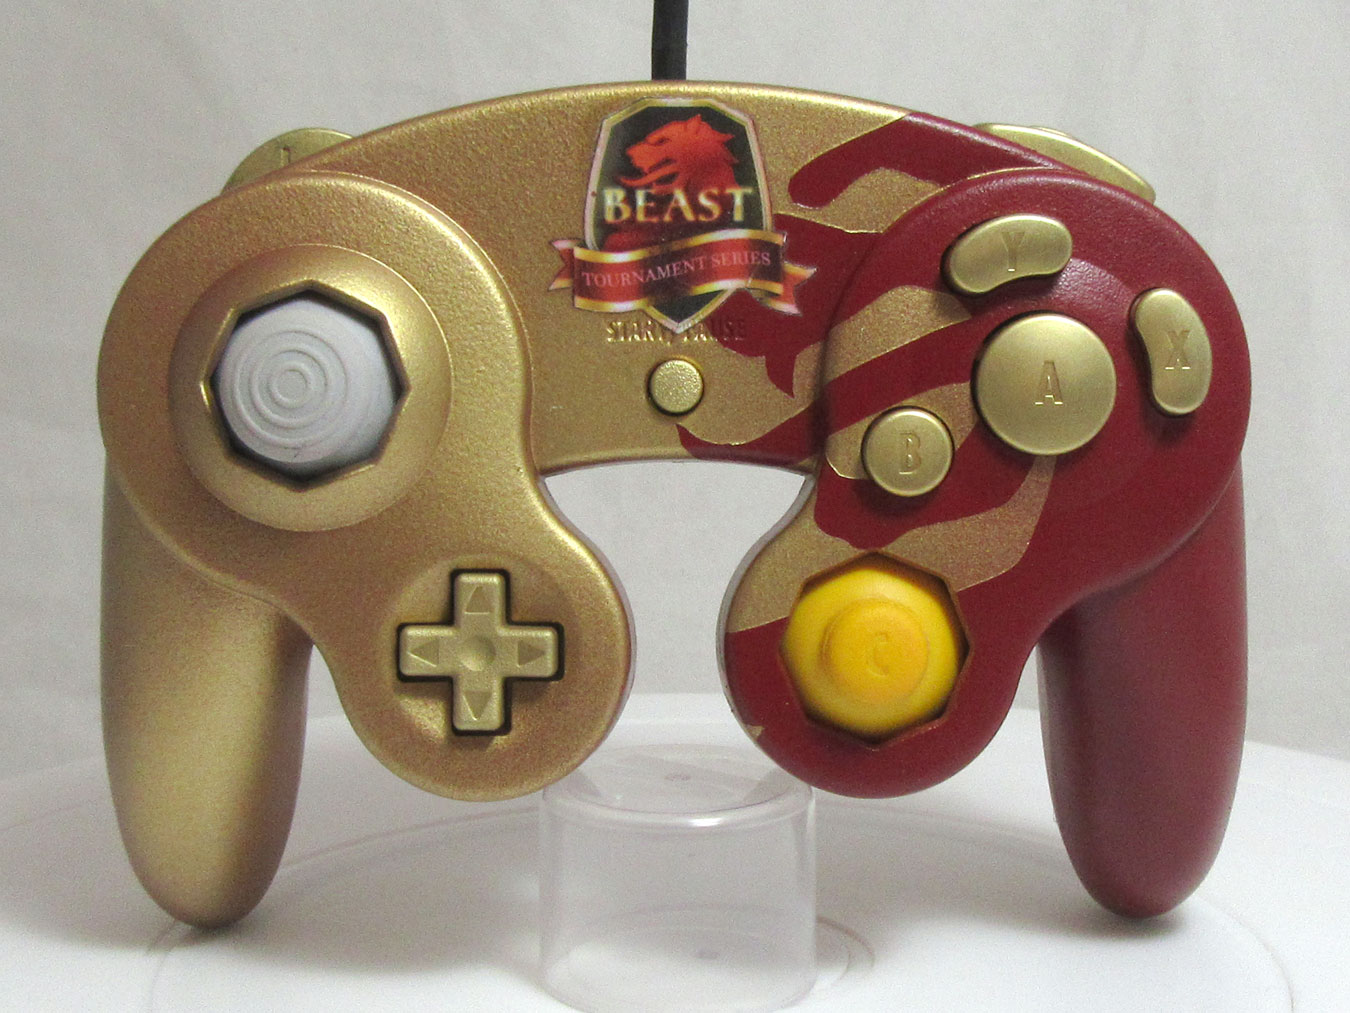 Beast controllers